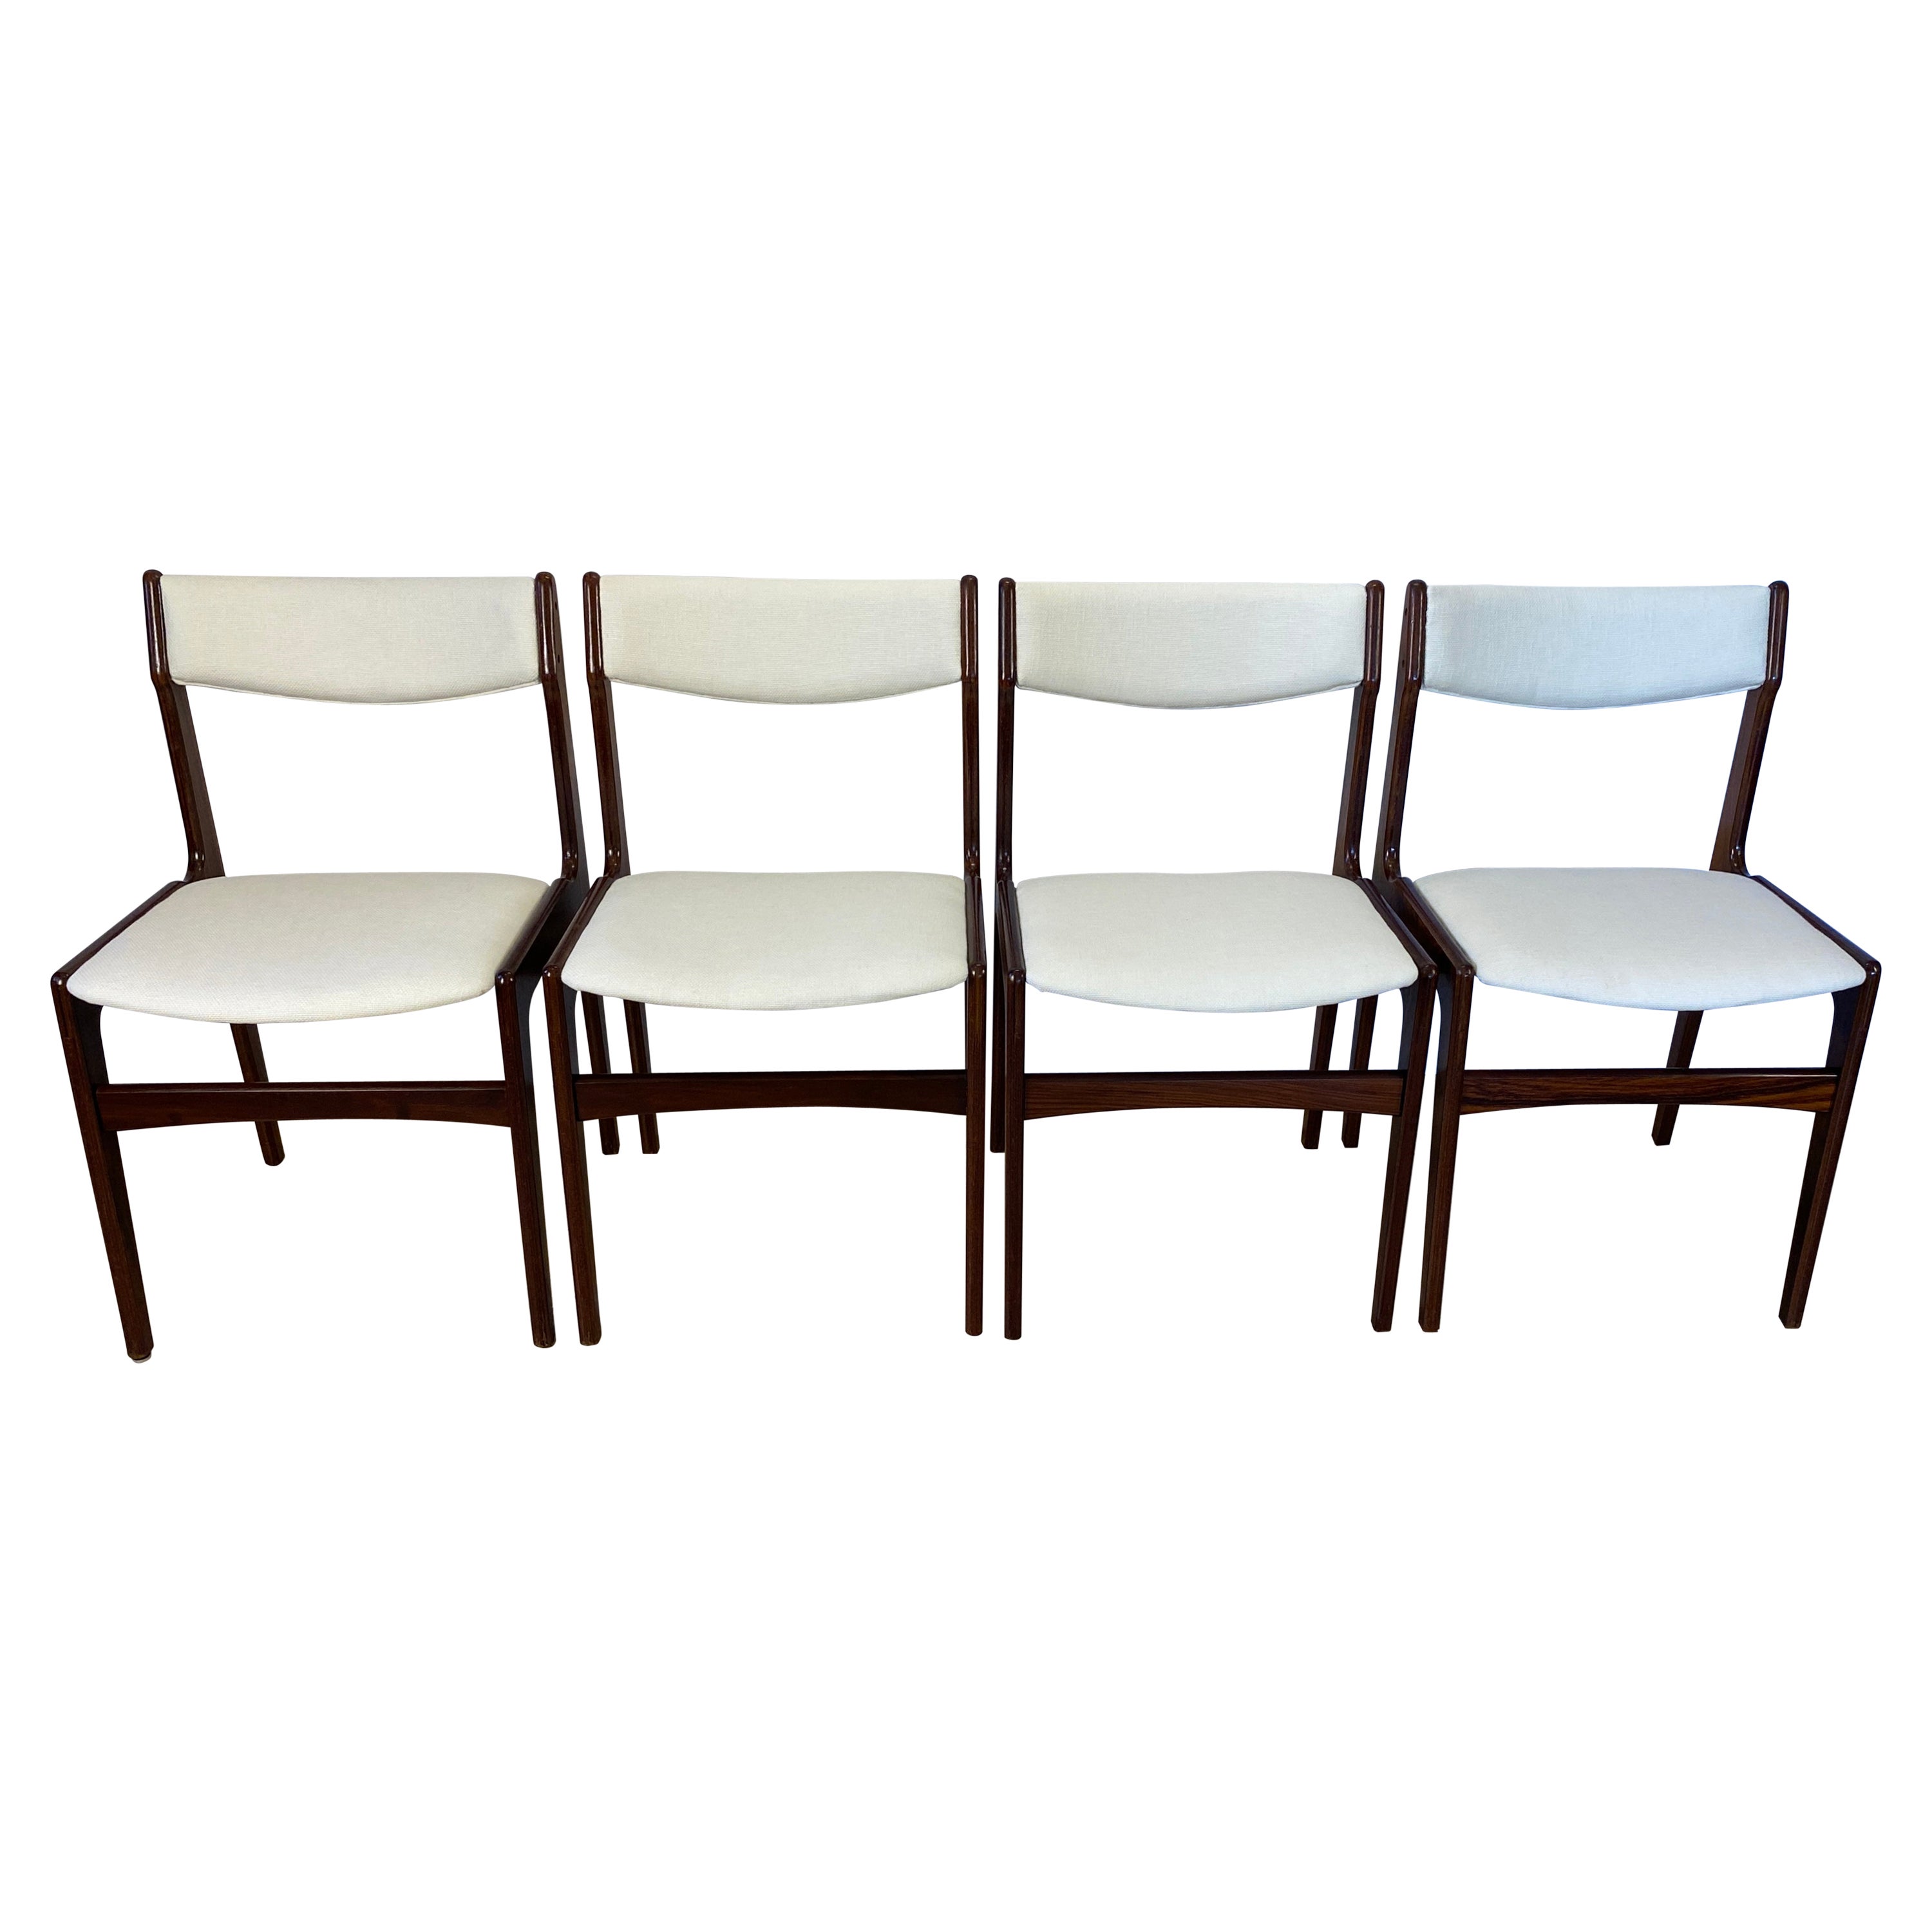 Set of 4 Mid-Century Modern Dining Room Chairs, Benny Linden Style